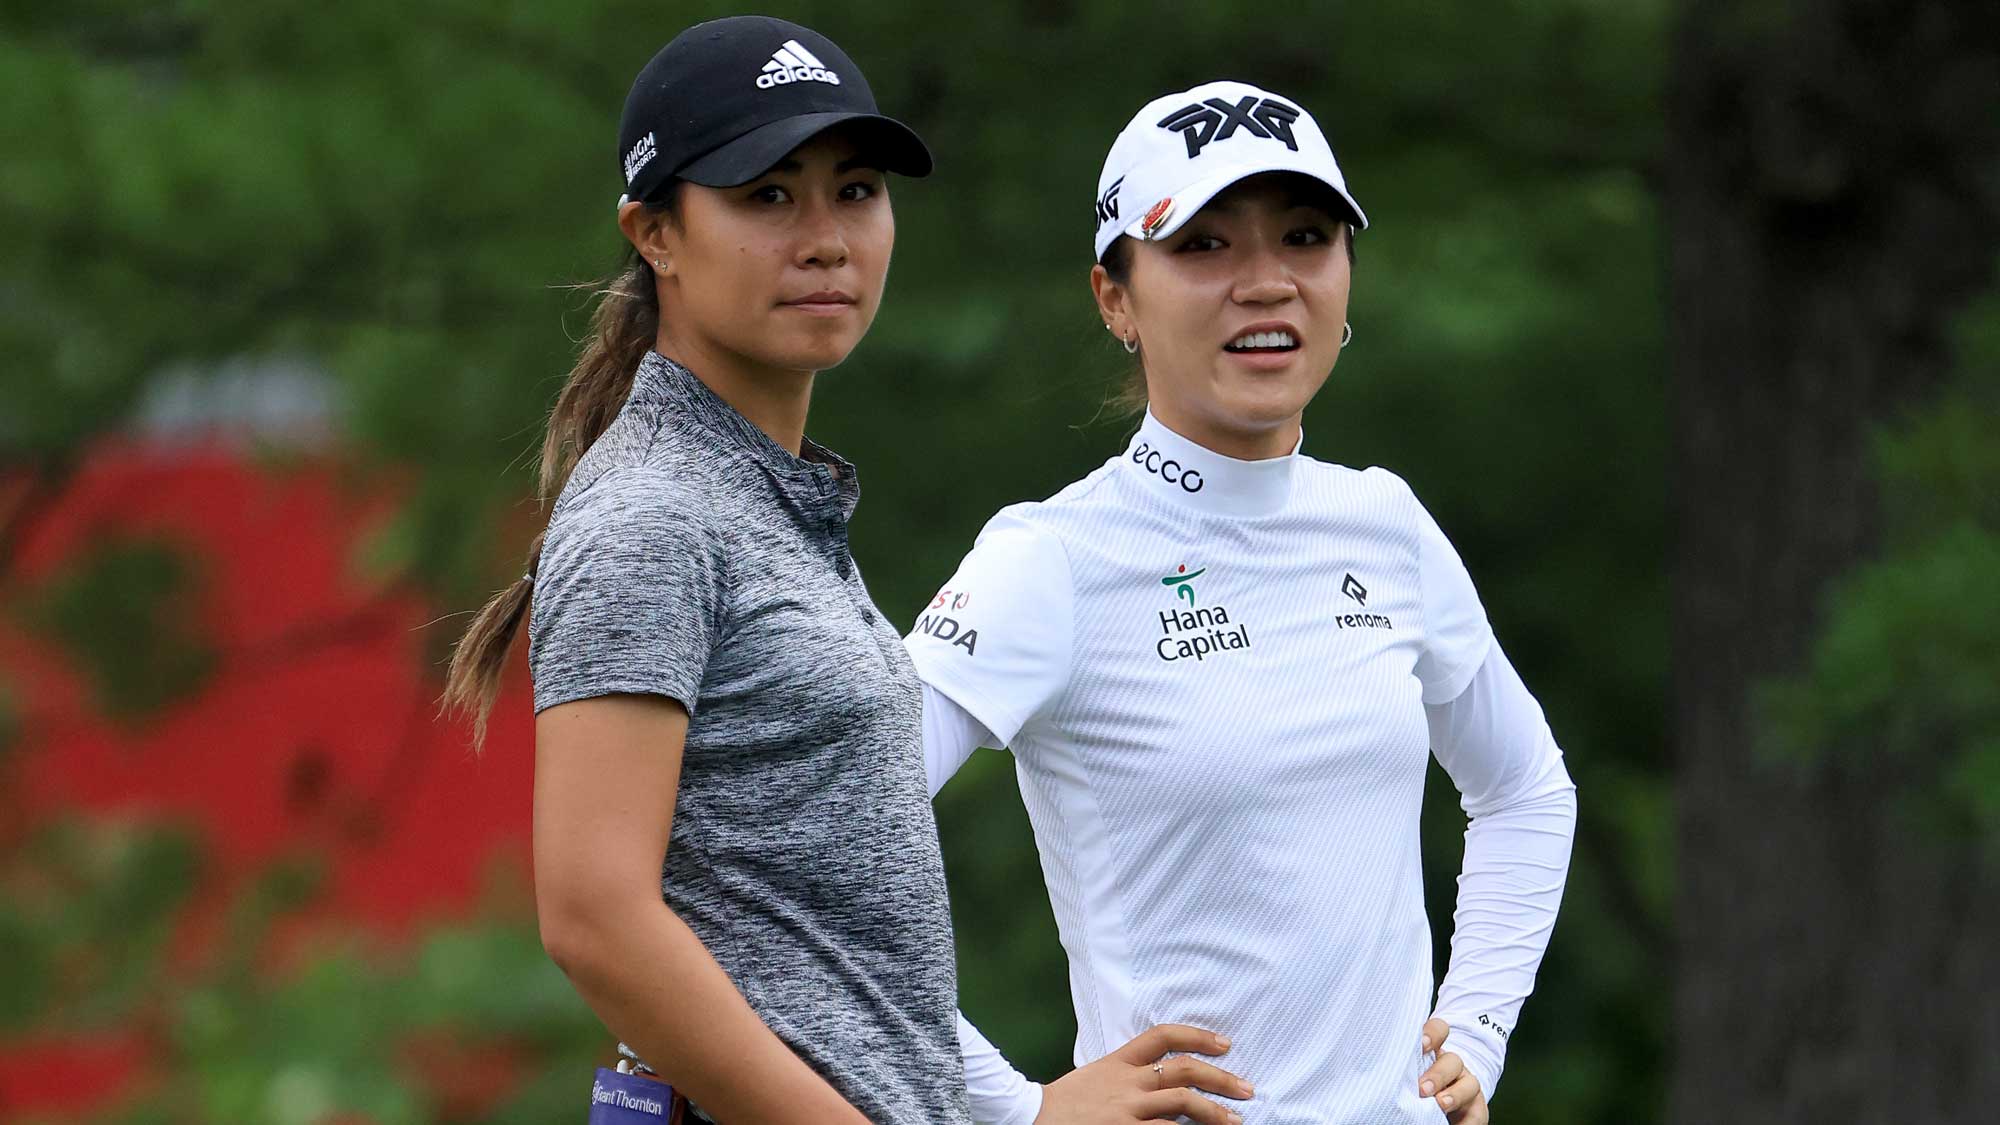 “Great Day to Have a Partner” For Kang and Ko | LPGA | Ladies ...